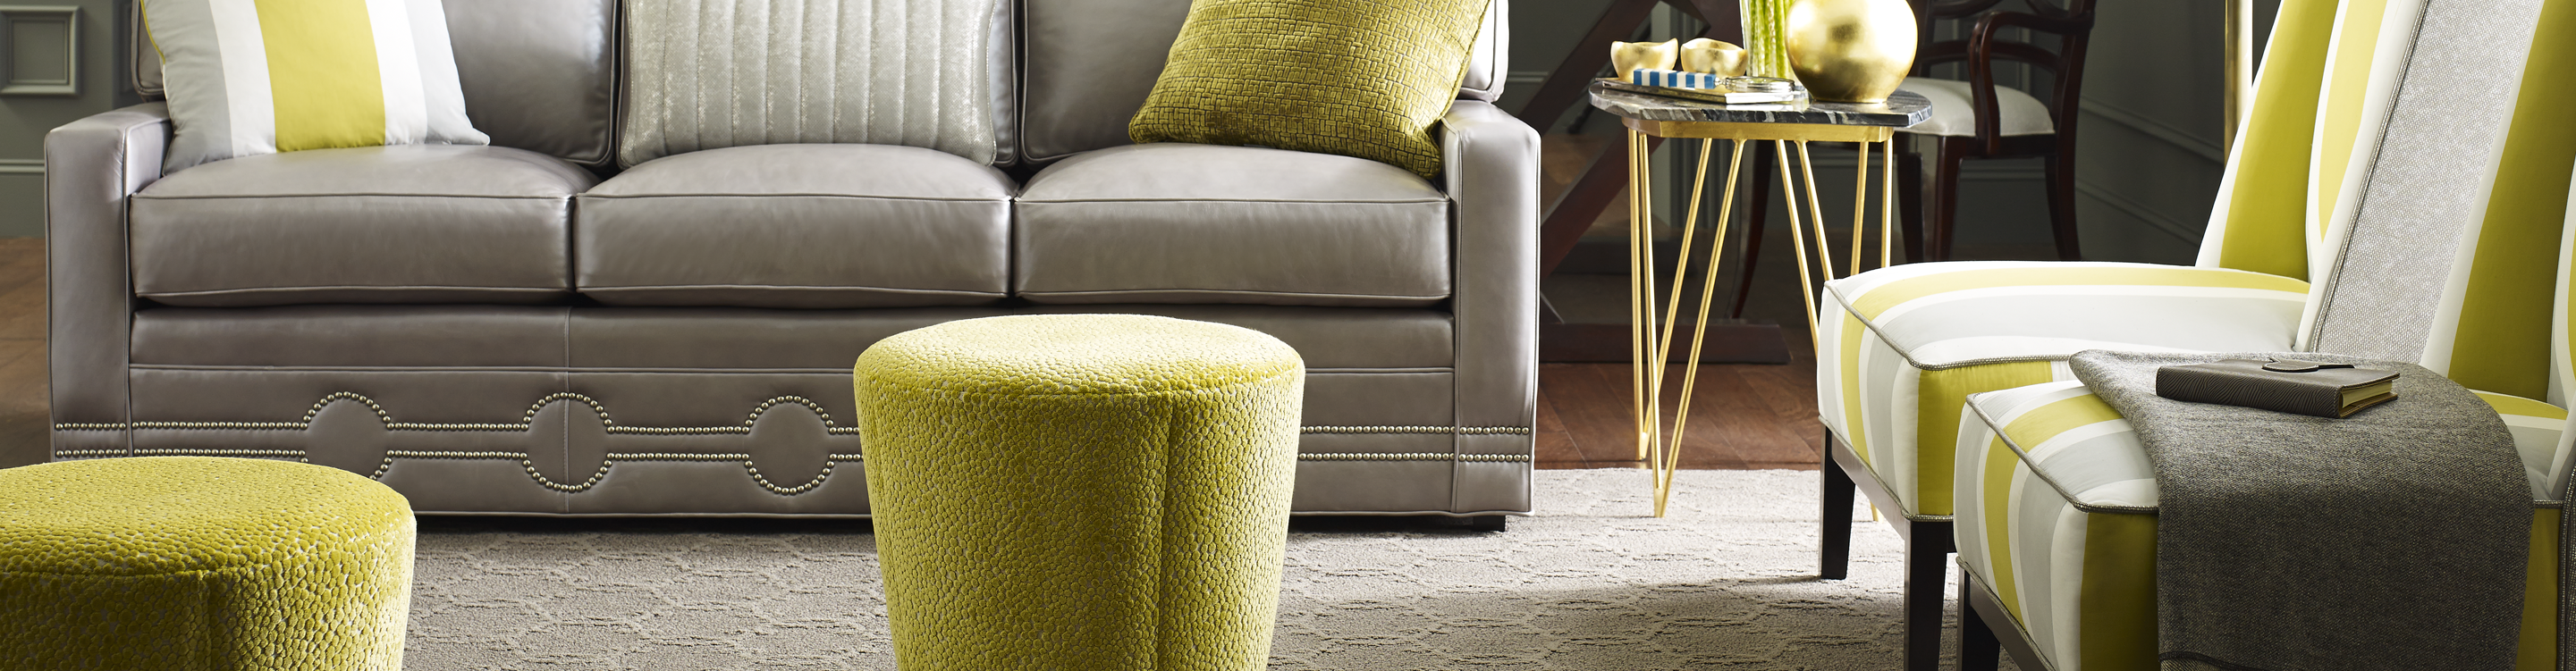 beige textured carpet in living space with lime green and grey furniture